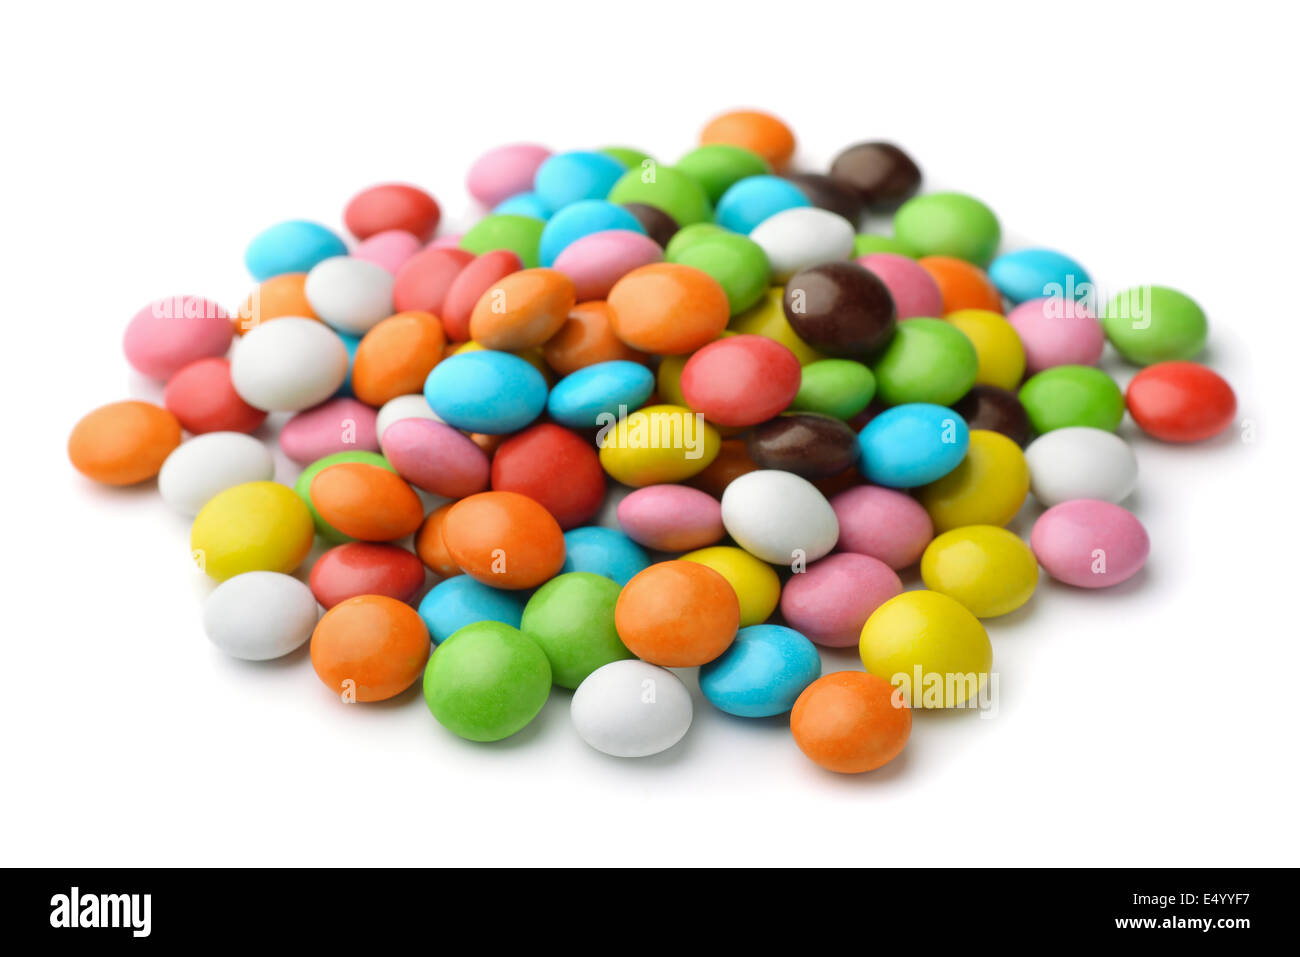 Pile of colorful candy drops isolated on white Stock Photo